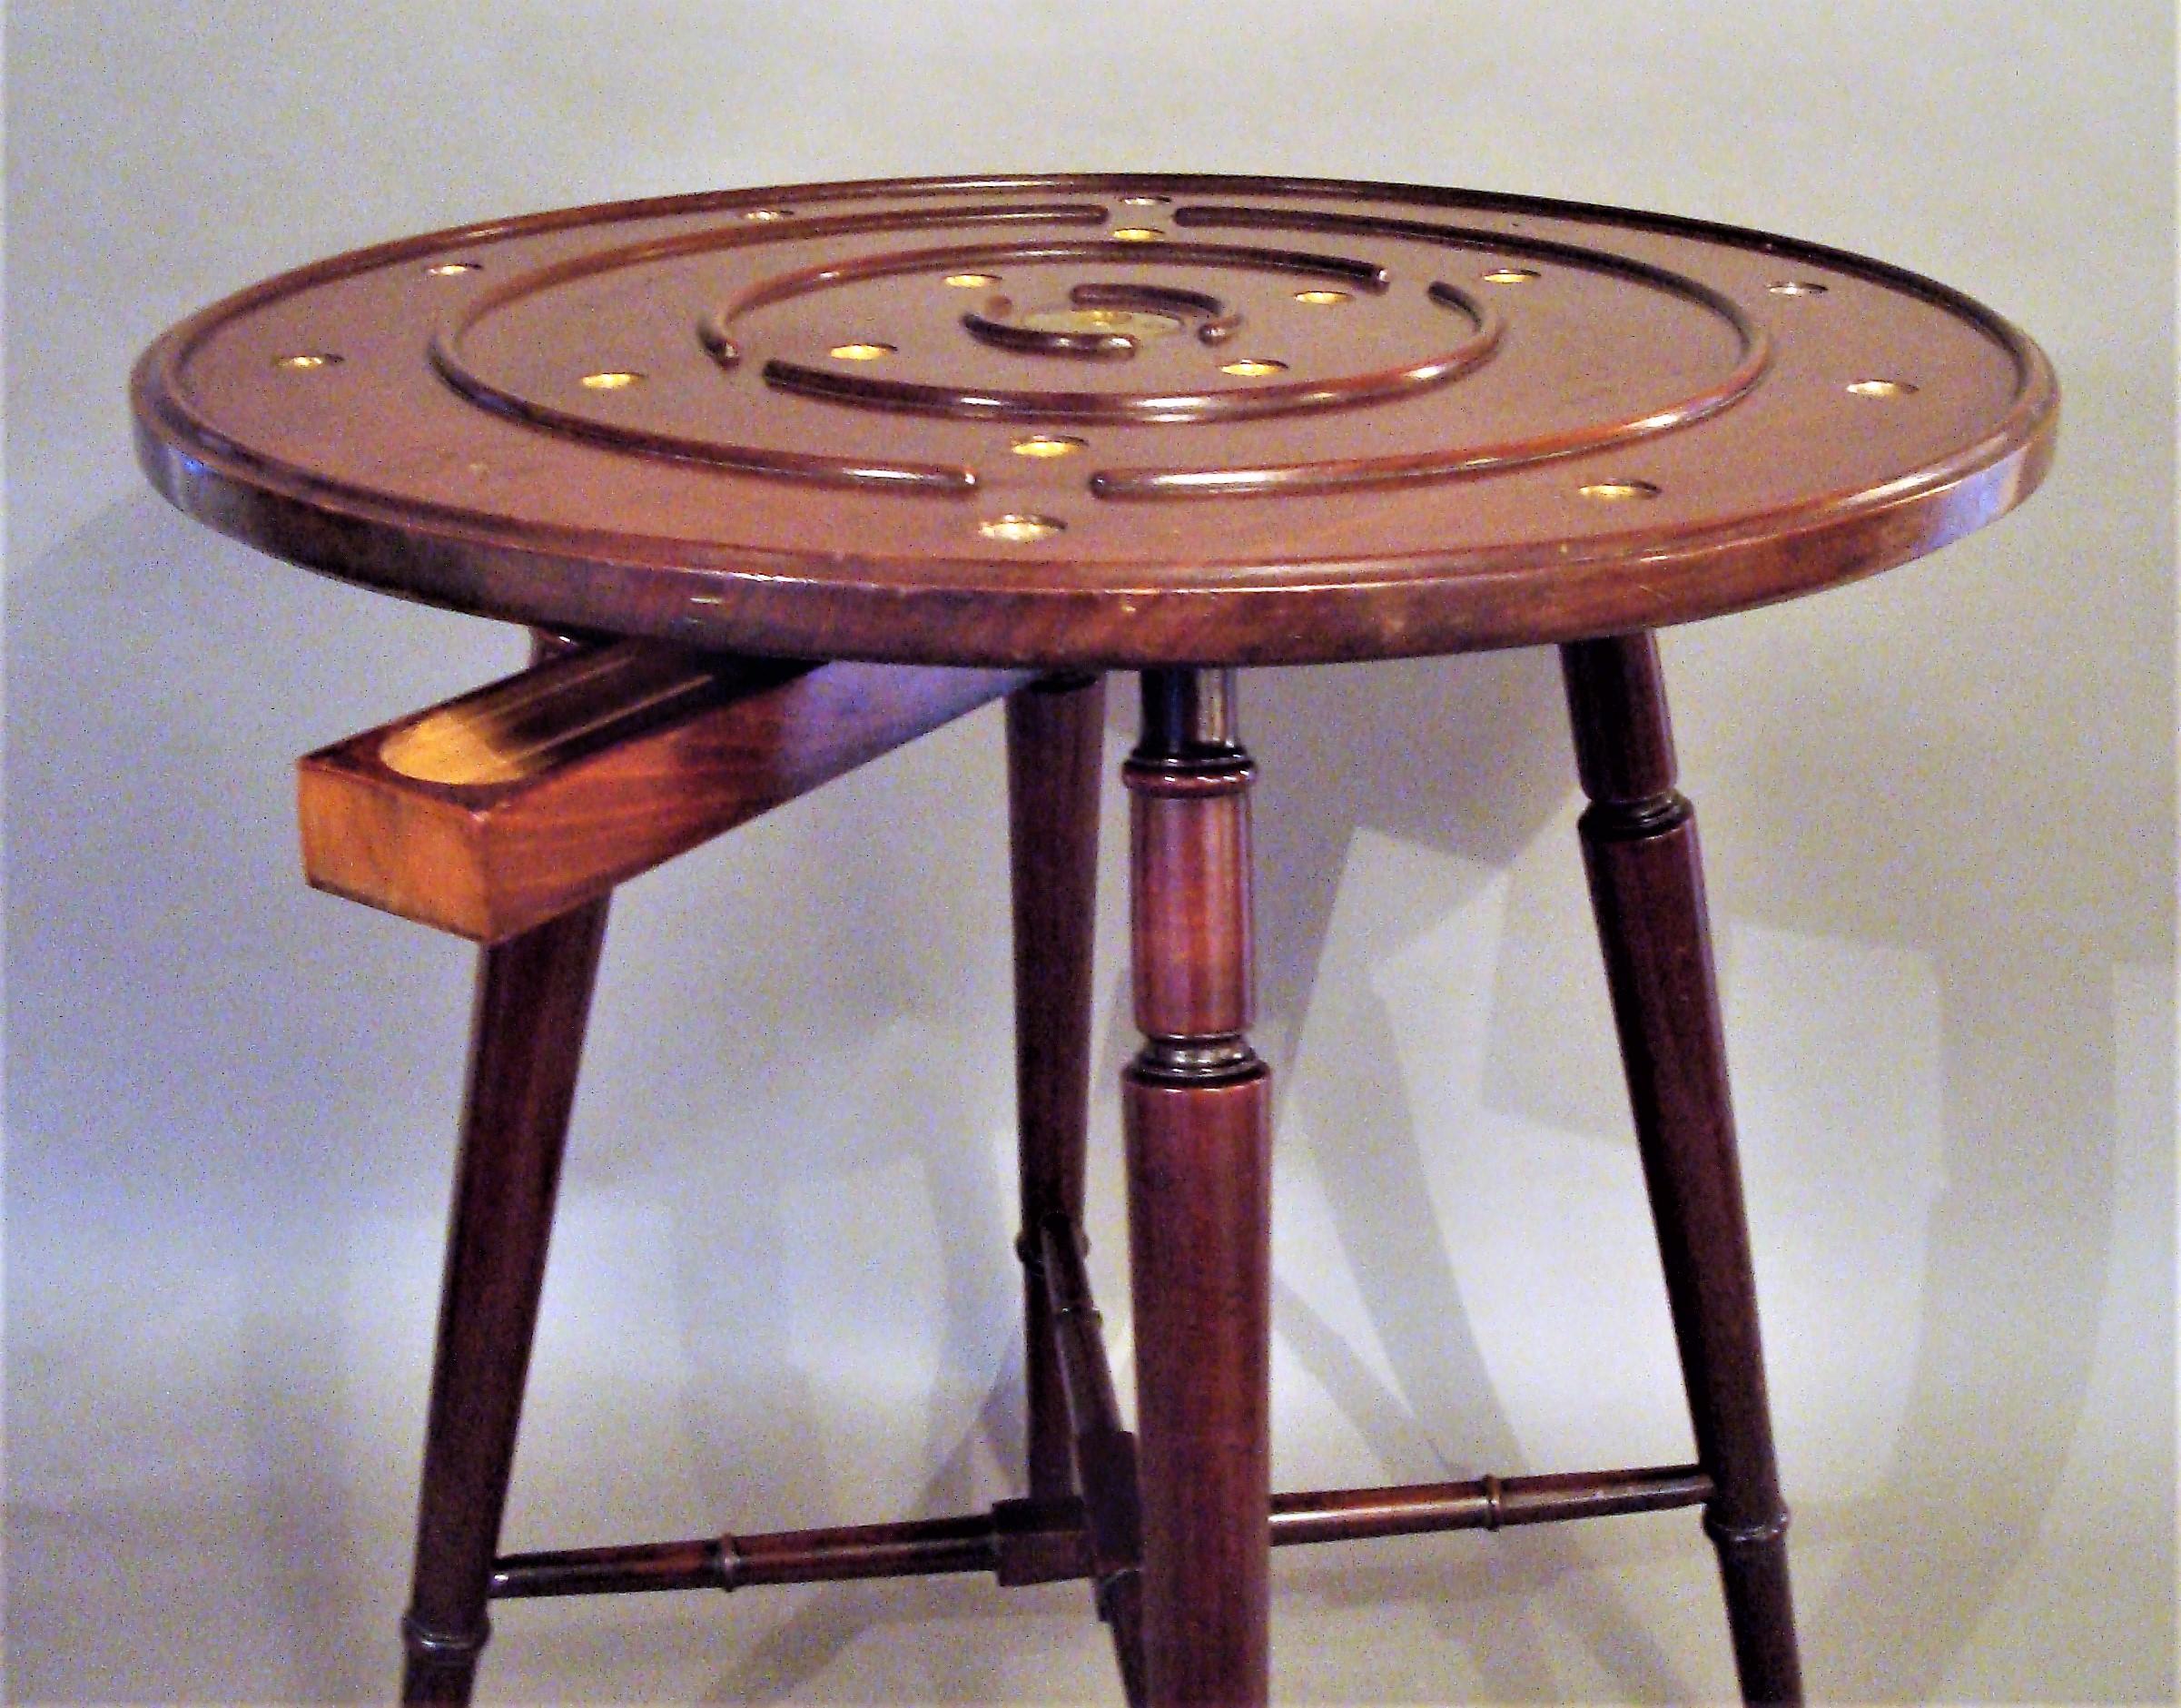 Late 19th Century Mahogany Golf Game Table In Good Condition For Sale In Moreton-in-Marsh, Gloucestershire